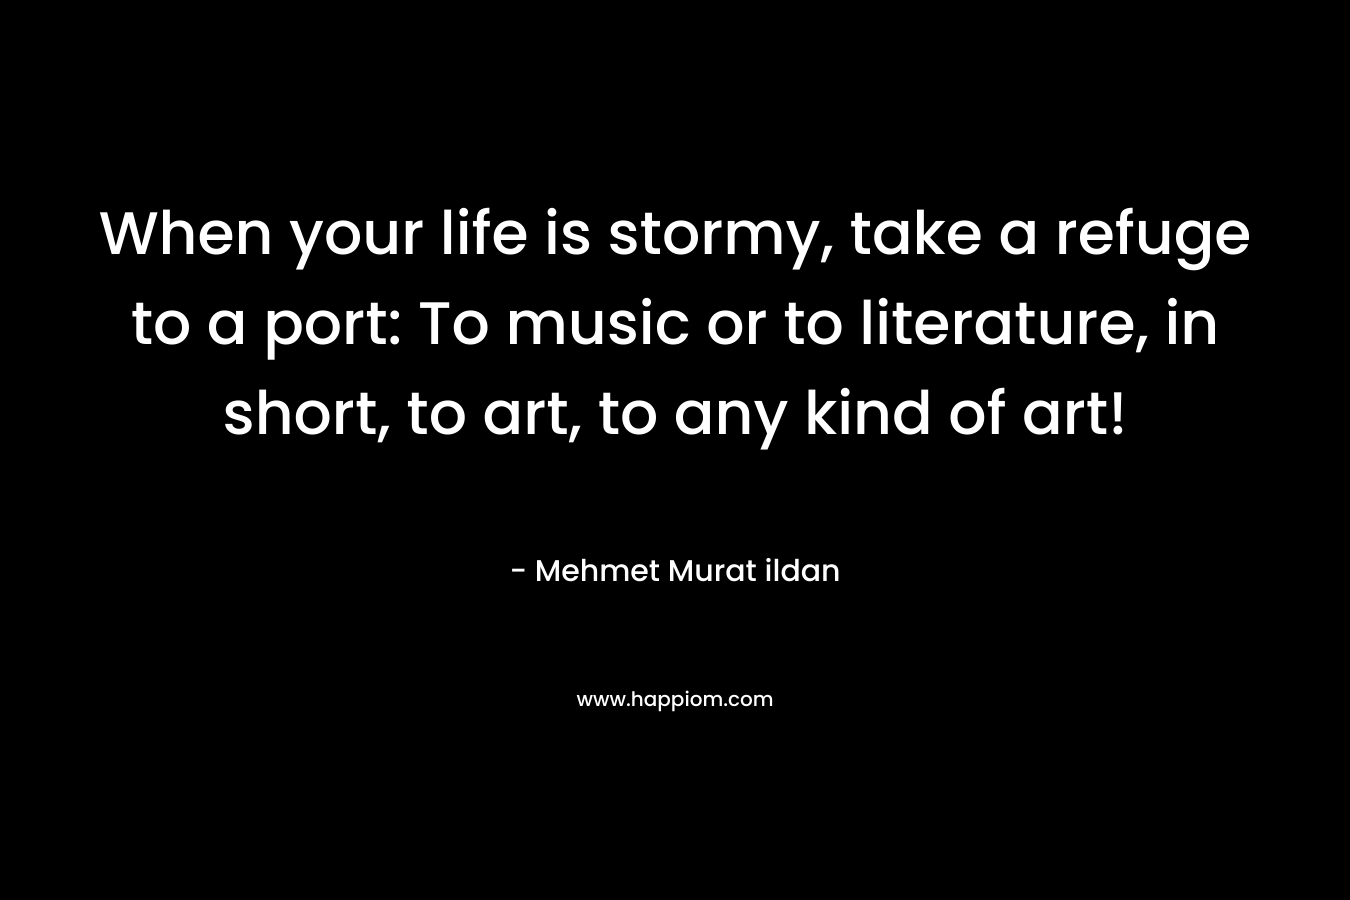 When your life is stormy, take a refuge to a port: To music or to literature, in short, to art, to any kind of art!